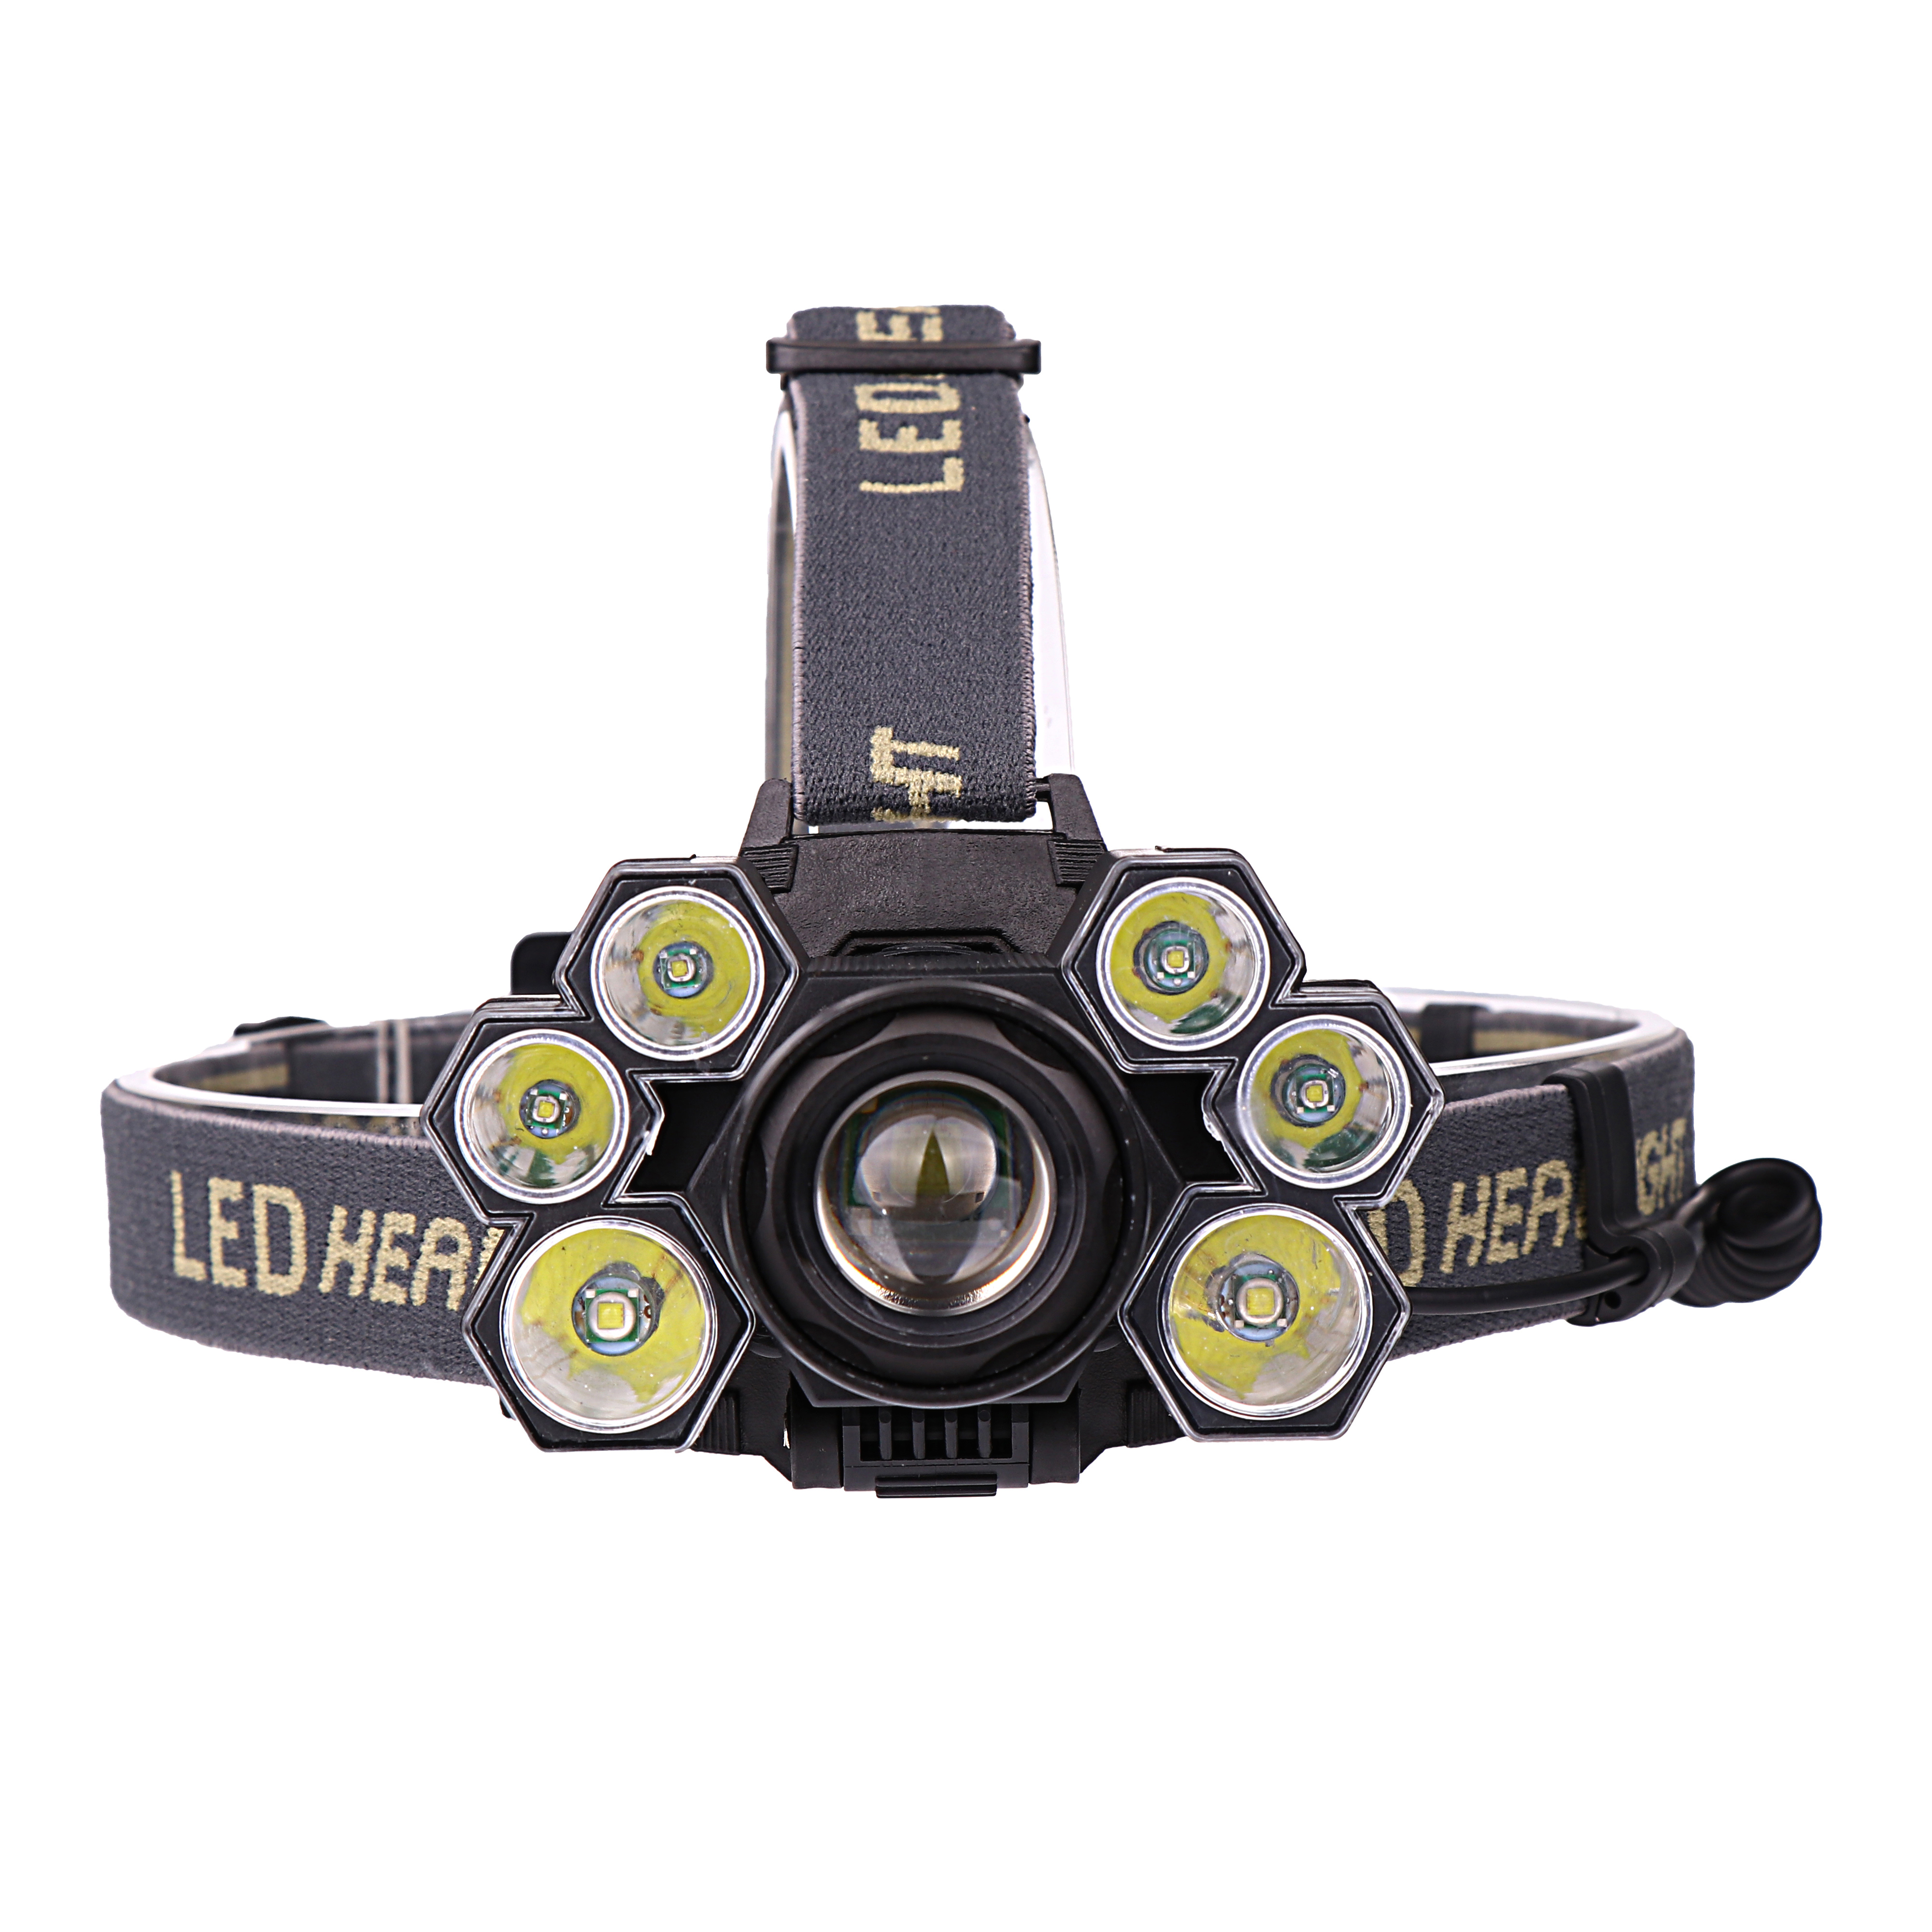 

XANES 4101-7 3500LM 3*T6+4*XPE LED Bike Bicycle Headlamp Mechanical Zoom 2*18650 Battery USB Rechargeable